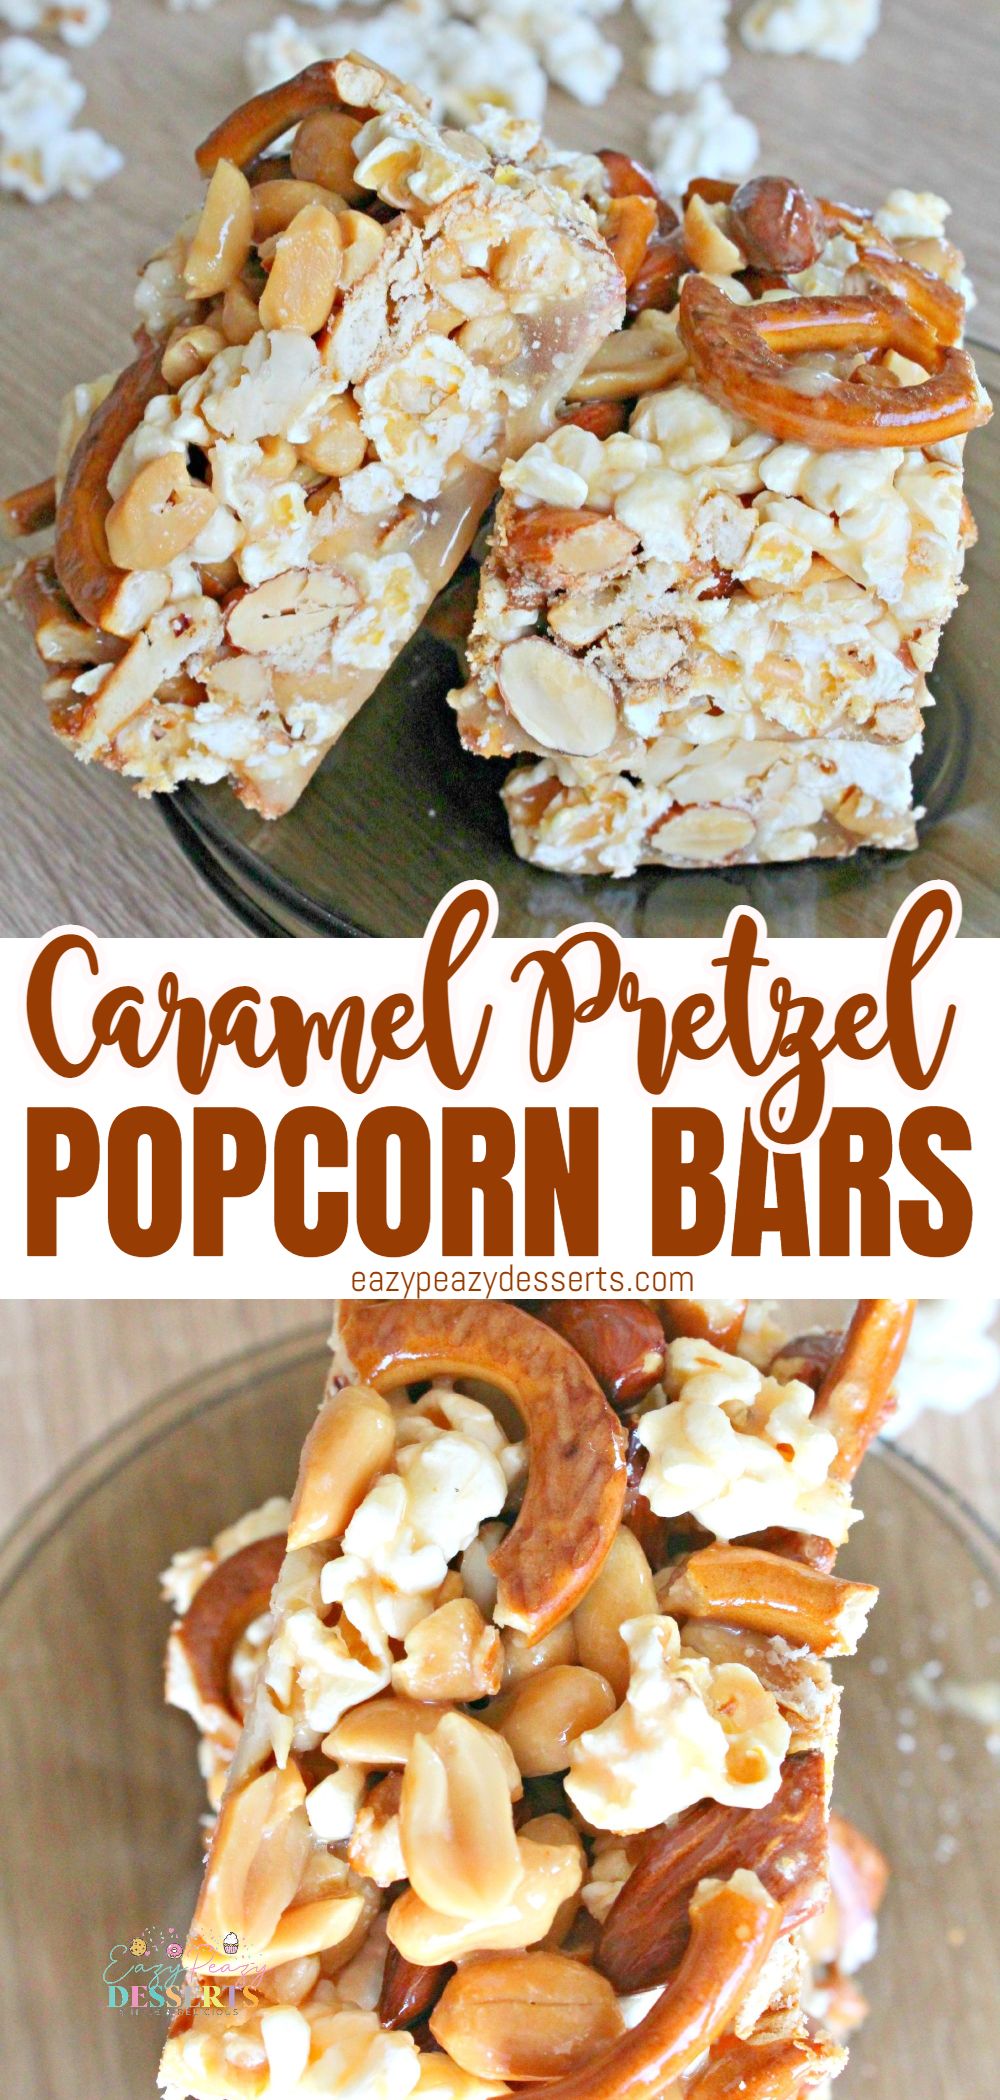 Photo collage of popcorn bars with caramel, pretzel and mixed nuts